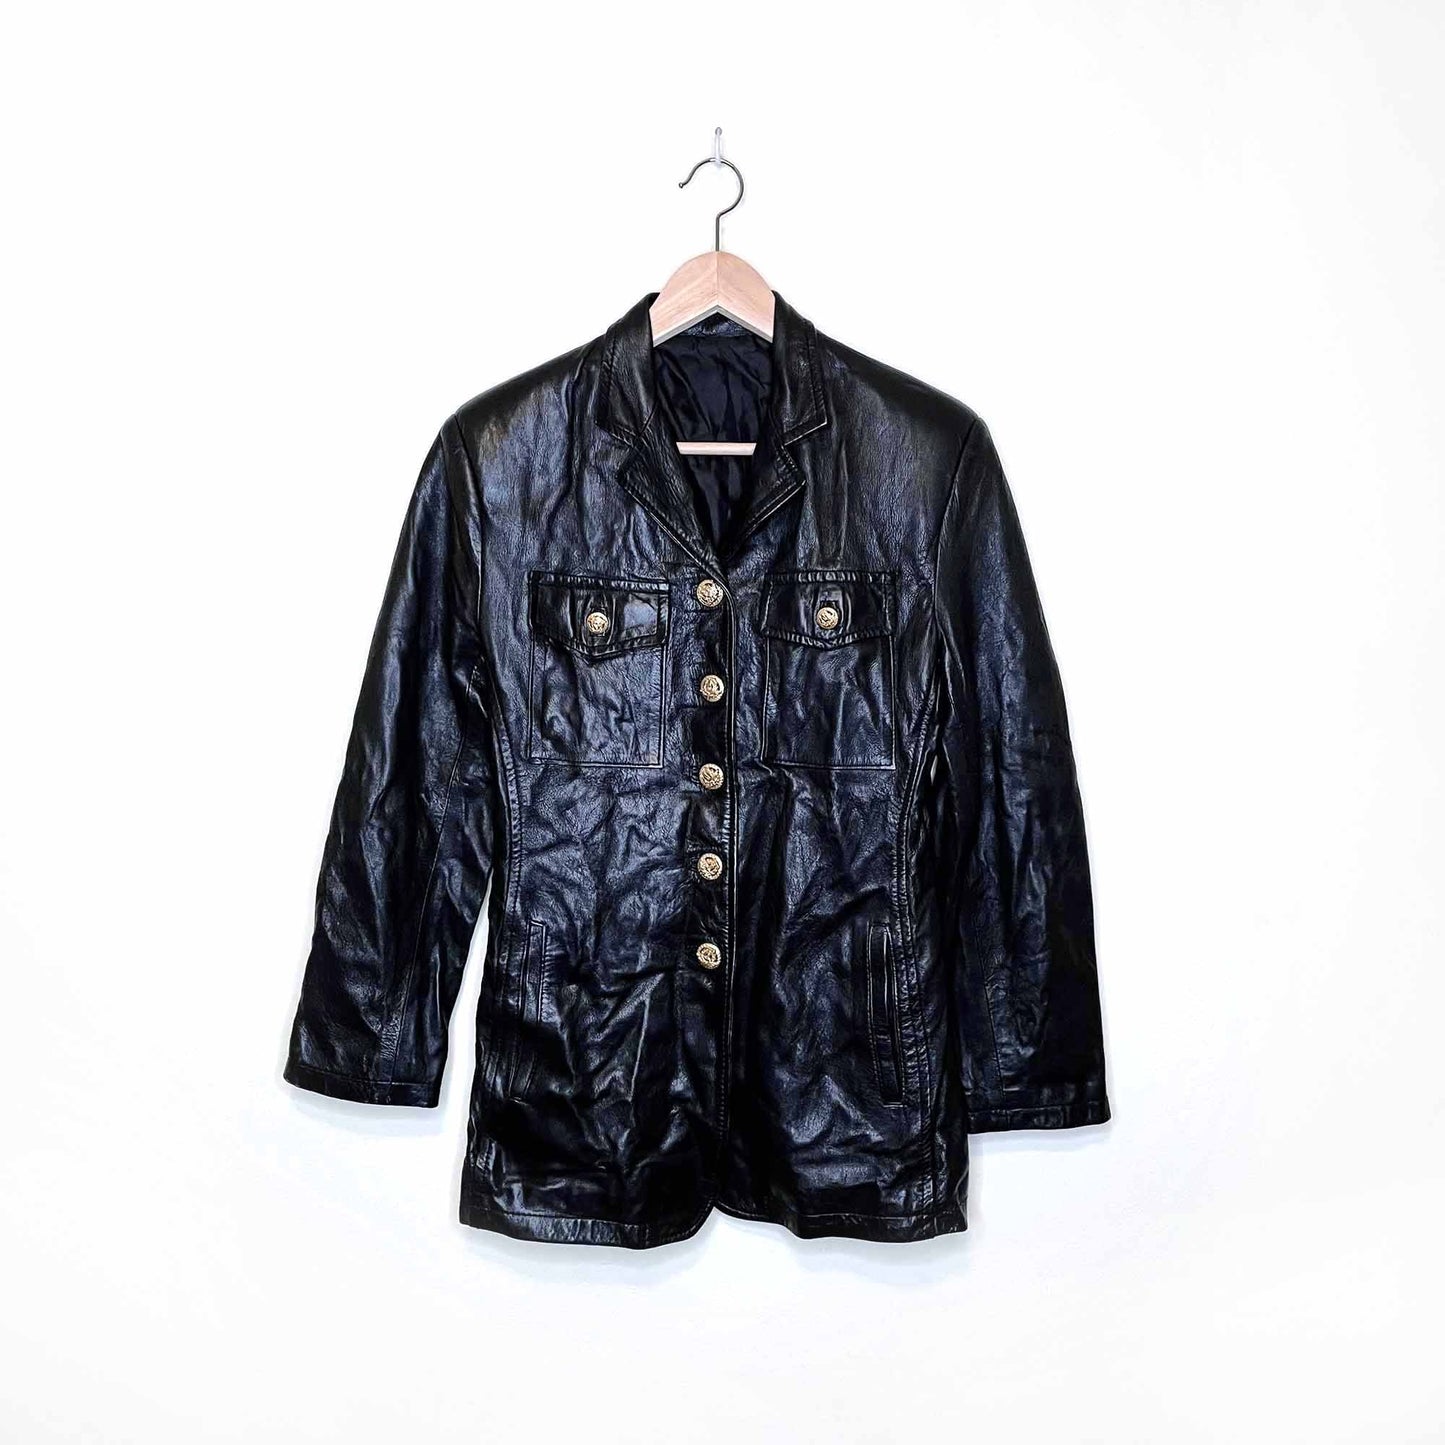 vintage versace style 90's leather jacket with gold medusa buttons - size small